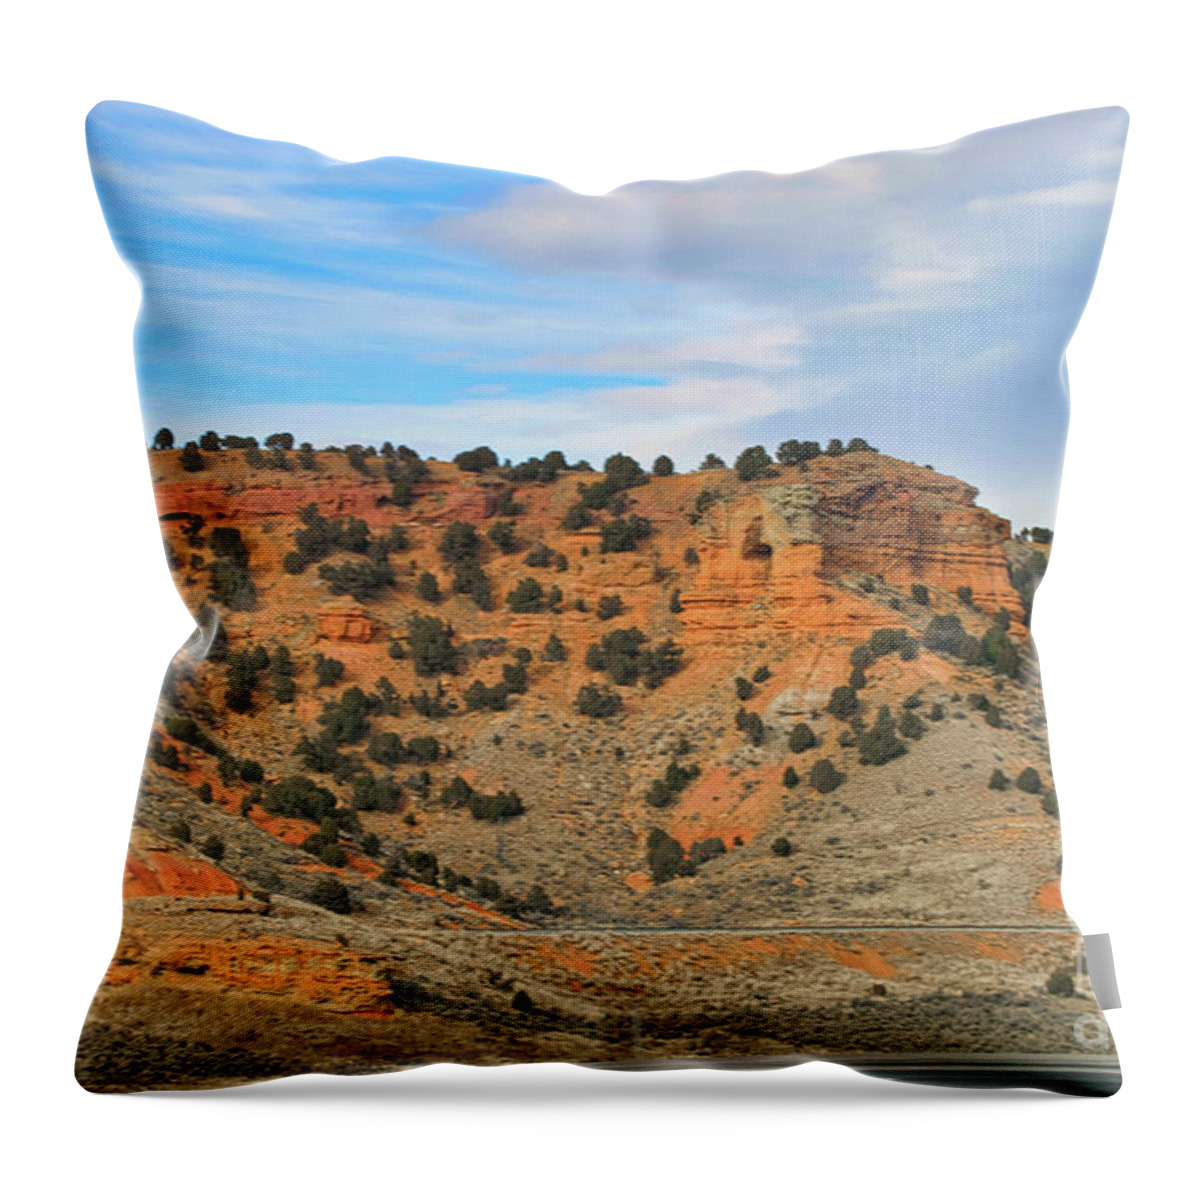 Landscape Throw Pillow featuring the photograph Trip Across USA Arizona Landscape by Chuck Kuhn